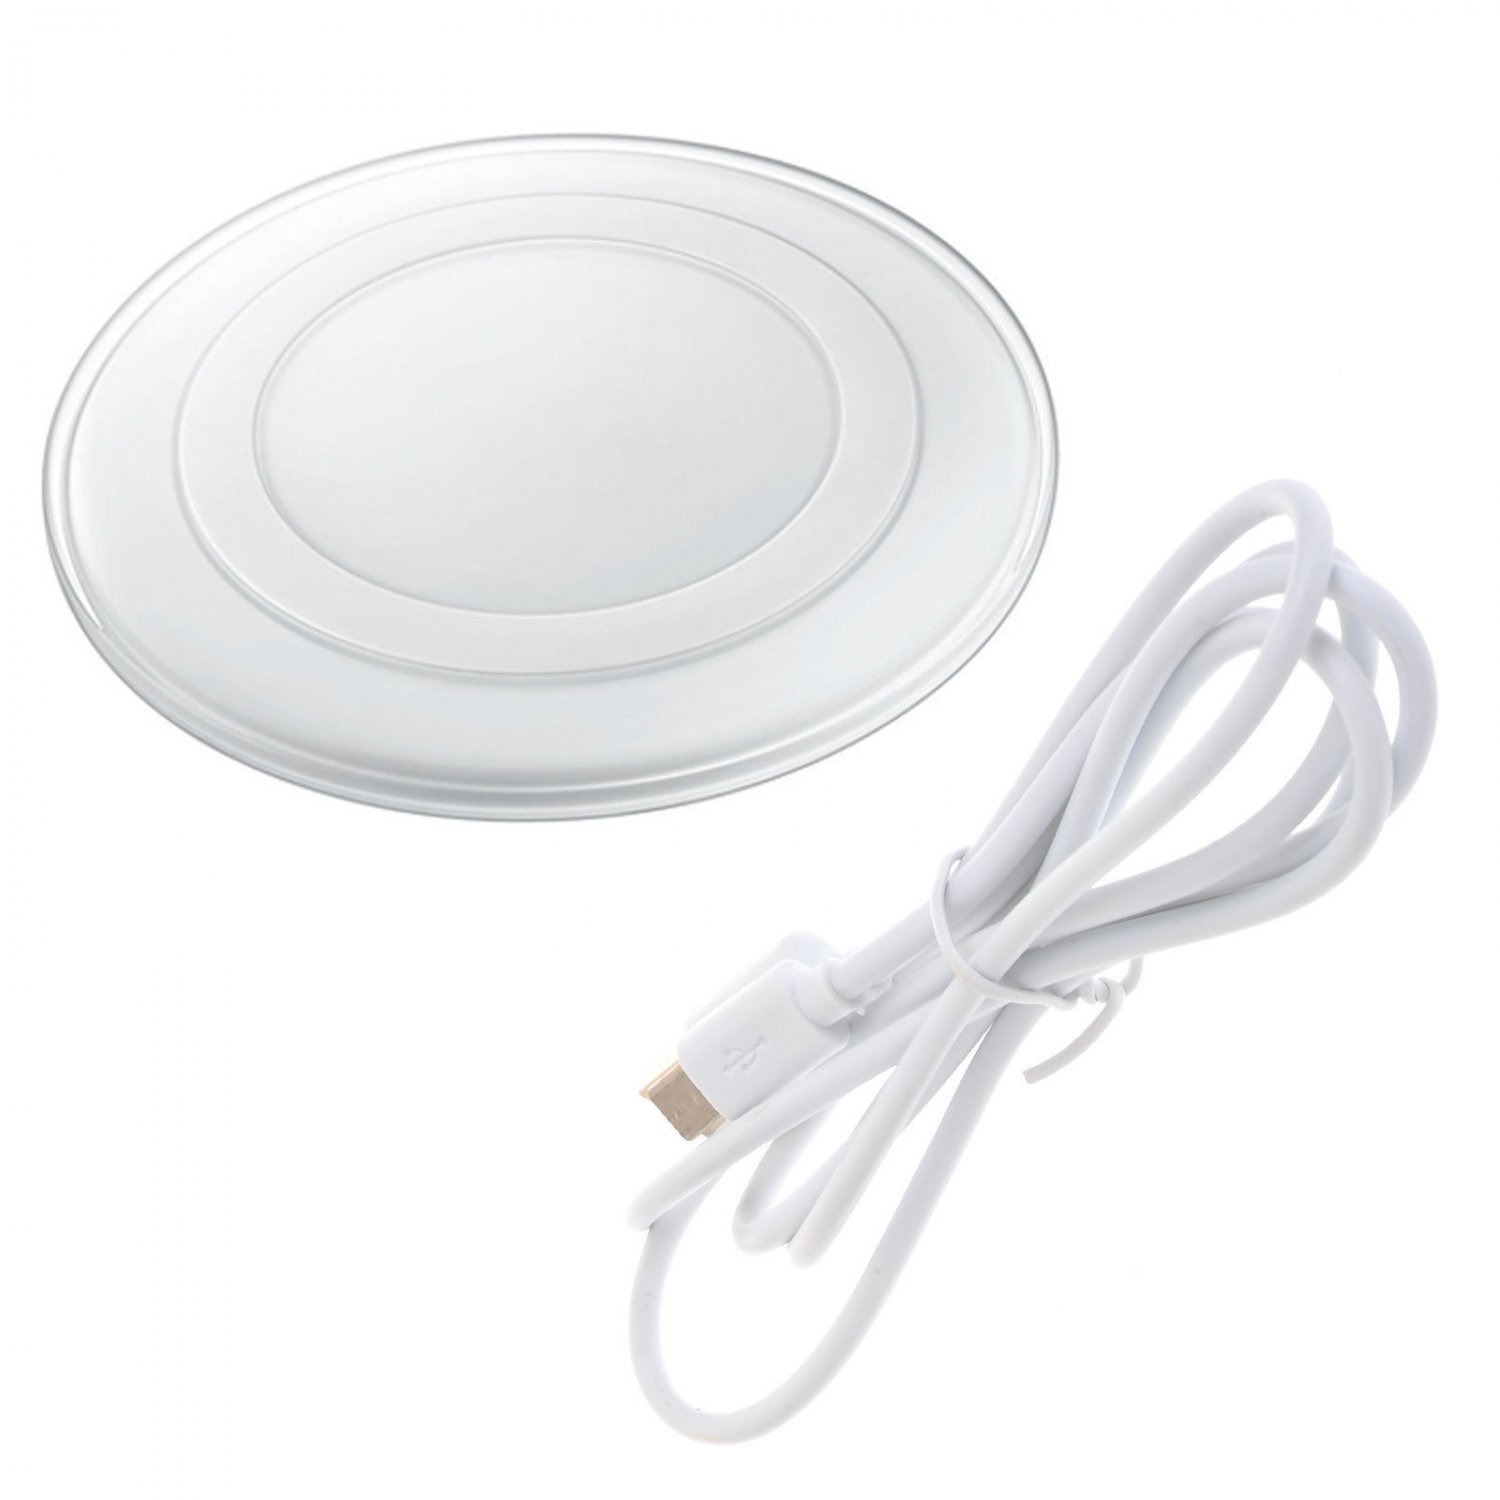 New White Wireless Charging Charger Charge Pad for Samsung Galaxy S6 Edge